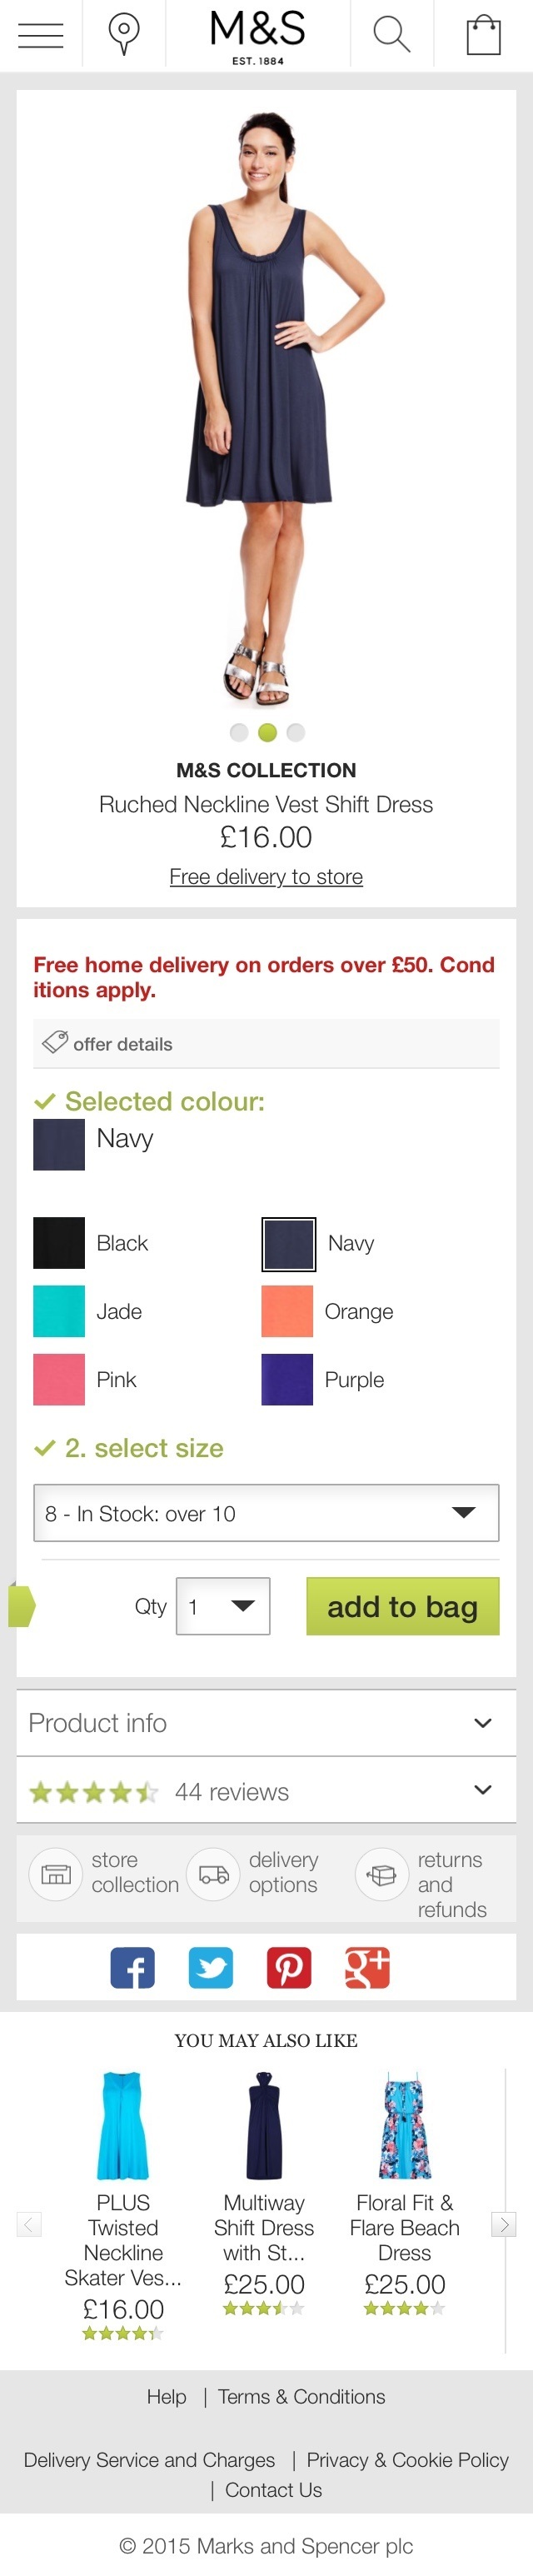 Marks & Spencer mobile product page design example